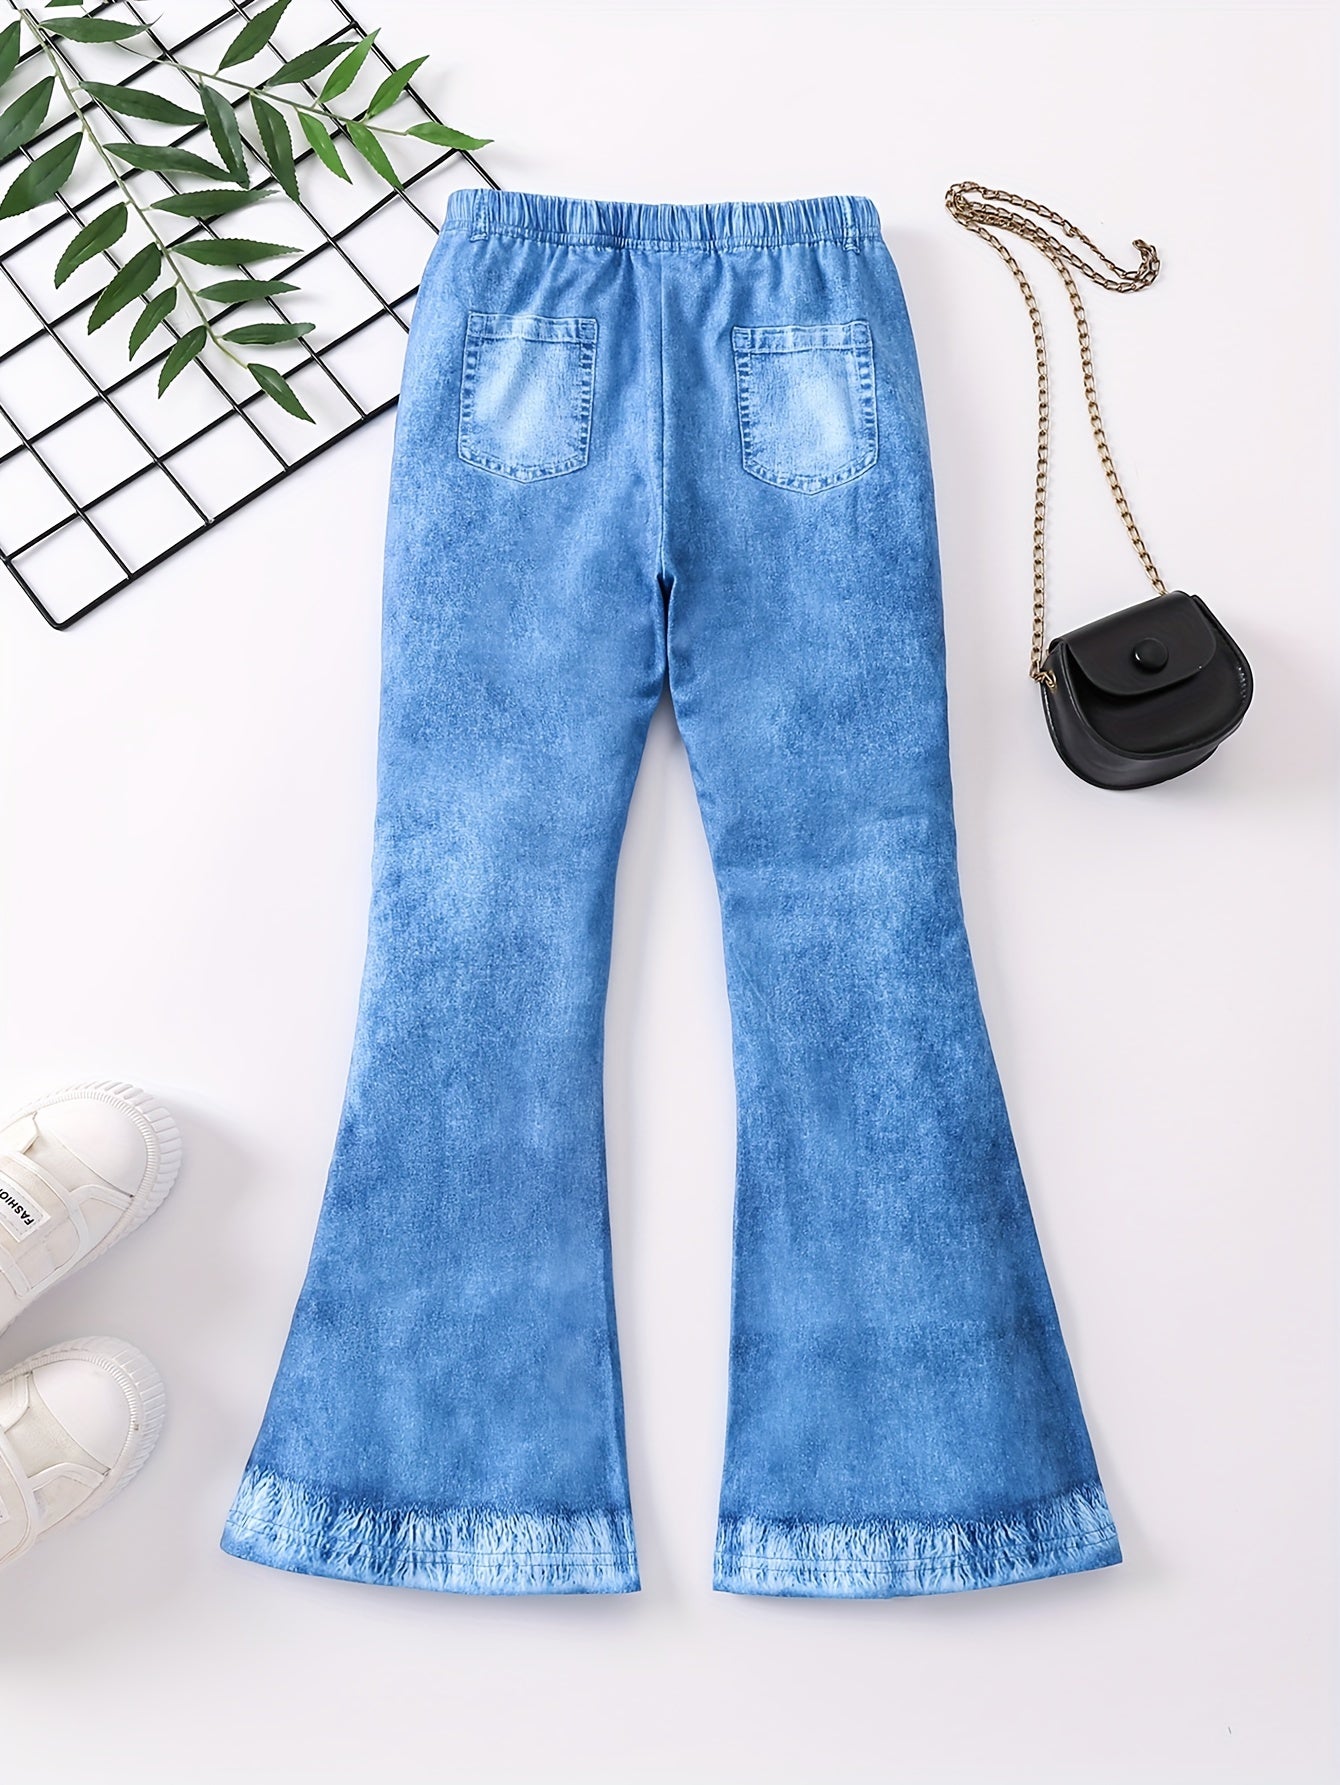 Faux Denim print Flare Pants Girls Comfy & Trendy Leggings Kids Clothes Party Gift Christmas